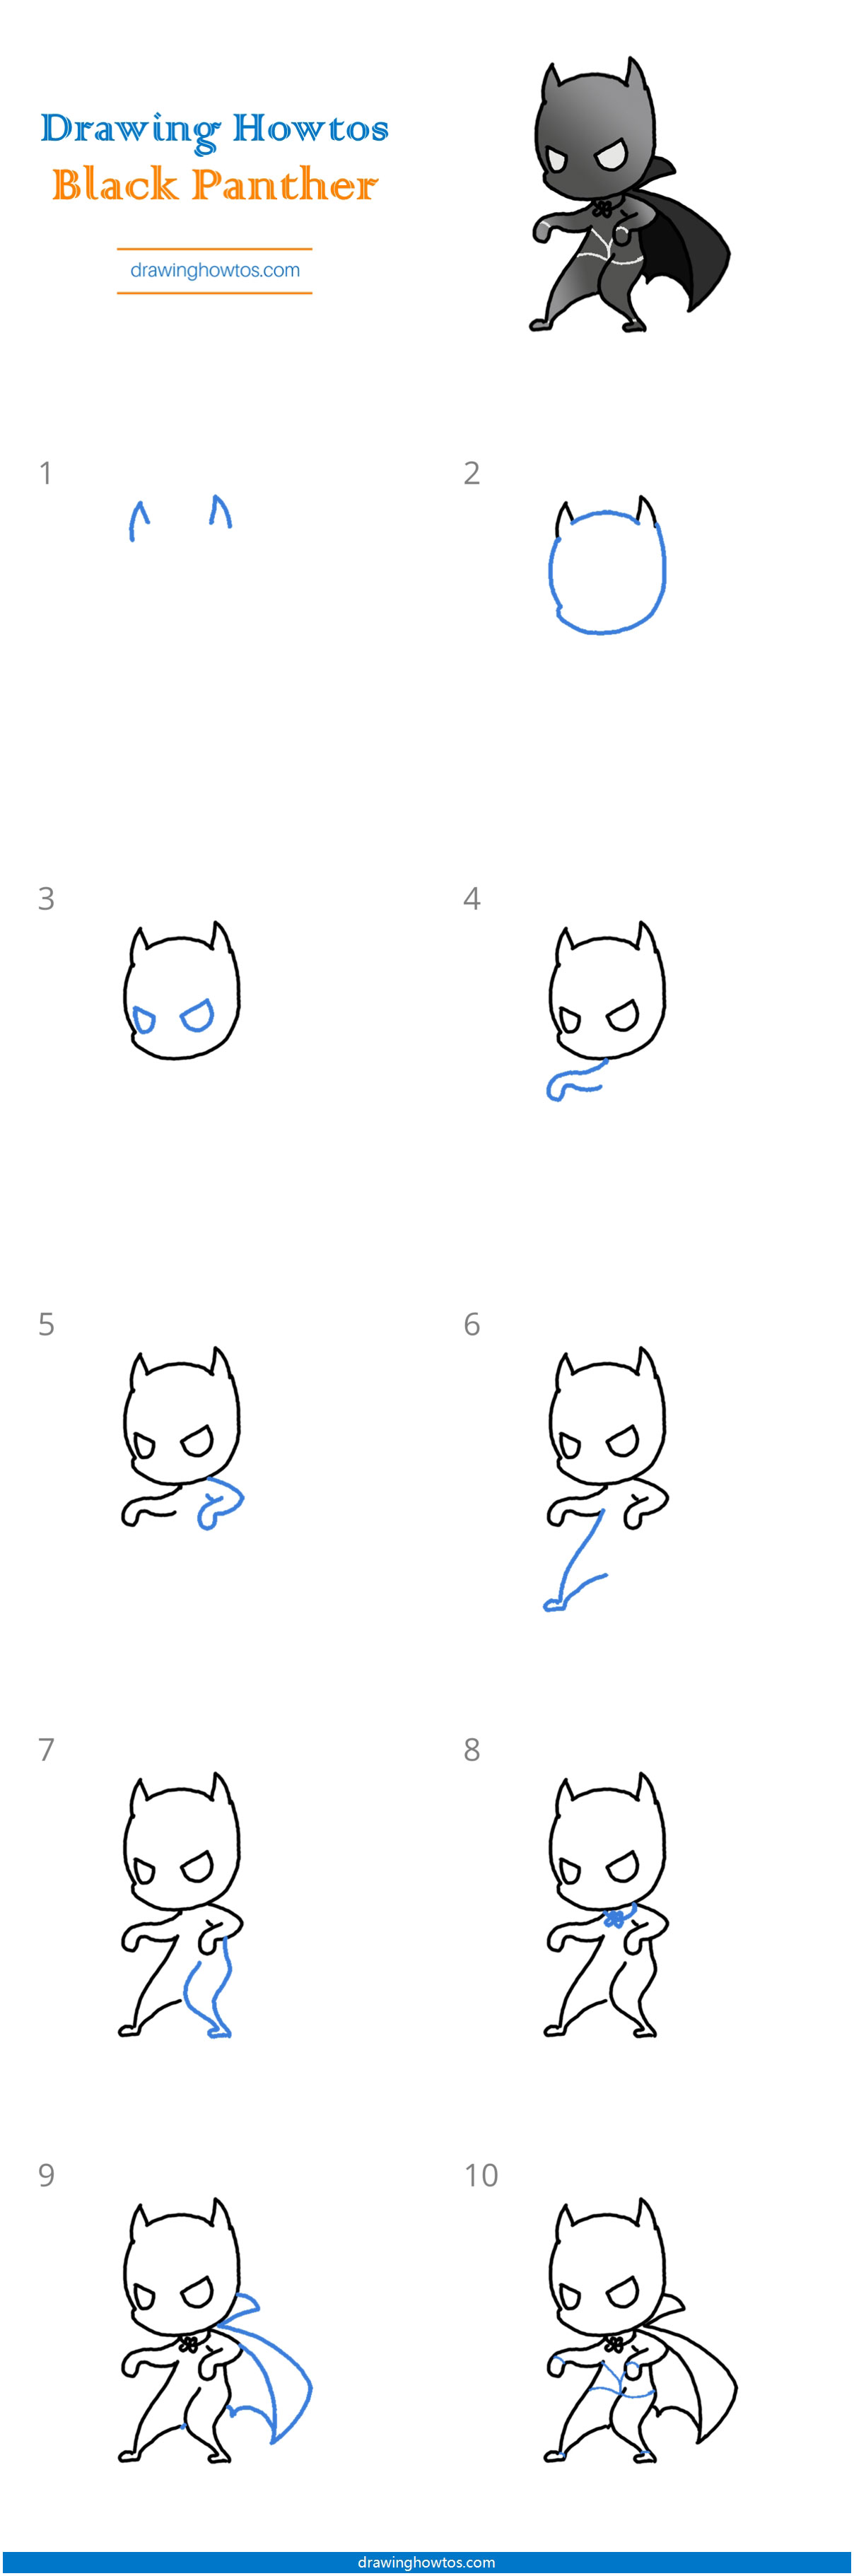 How to Draw Black Panther Step by Step